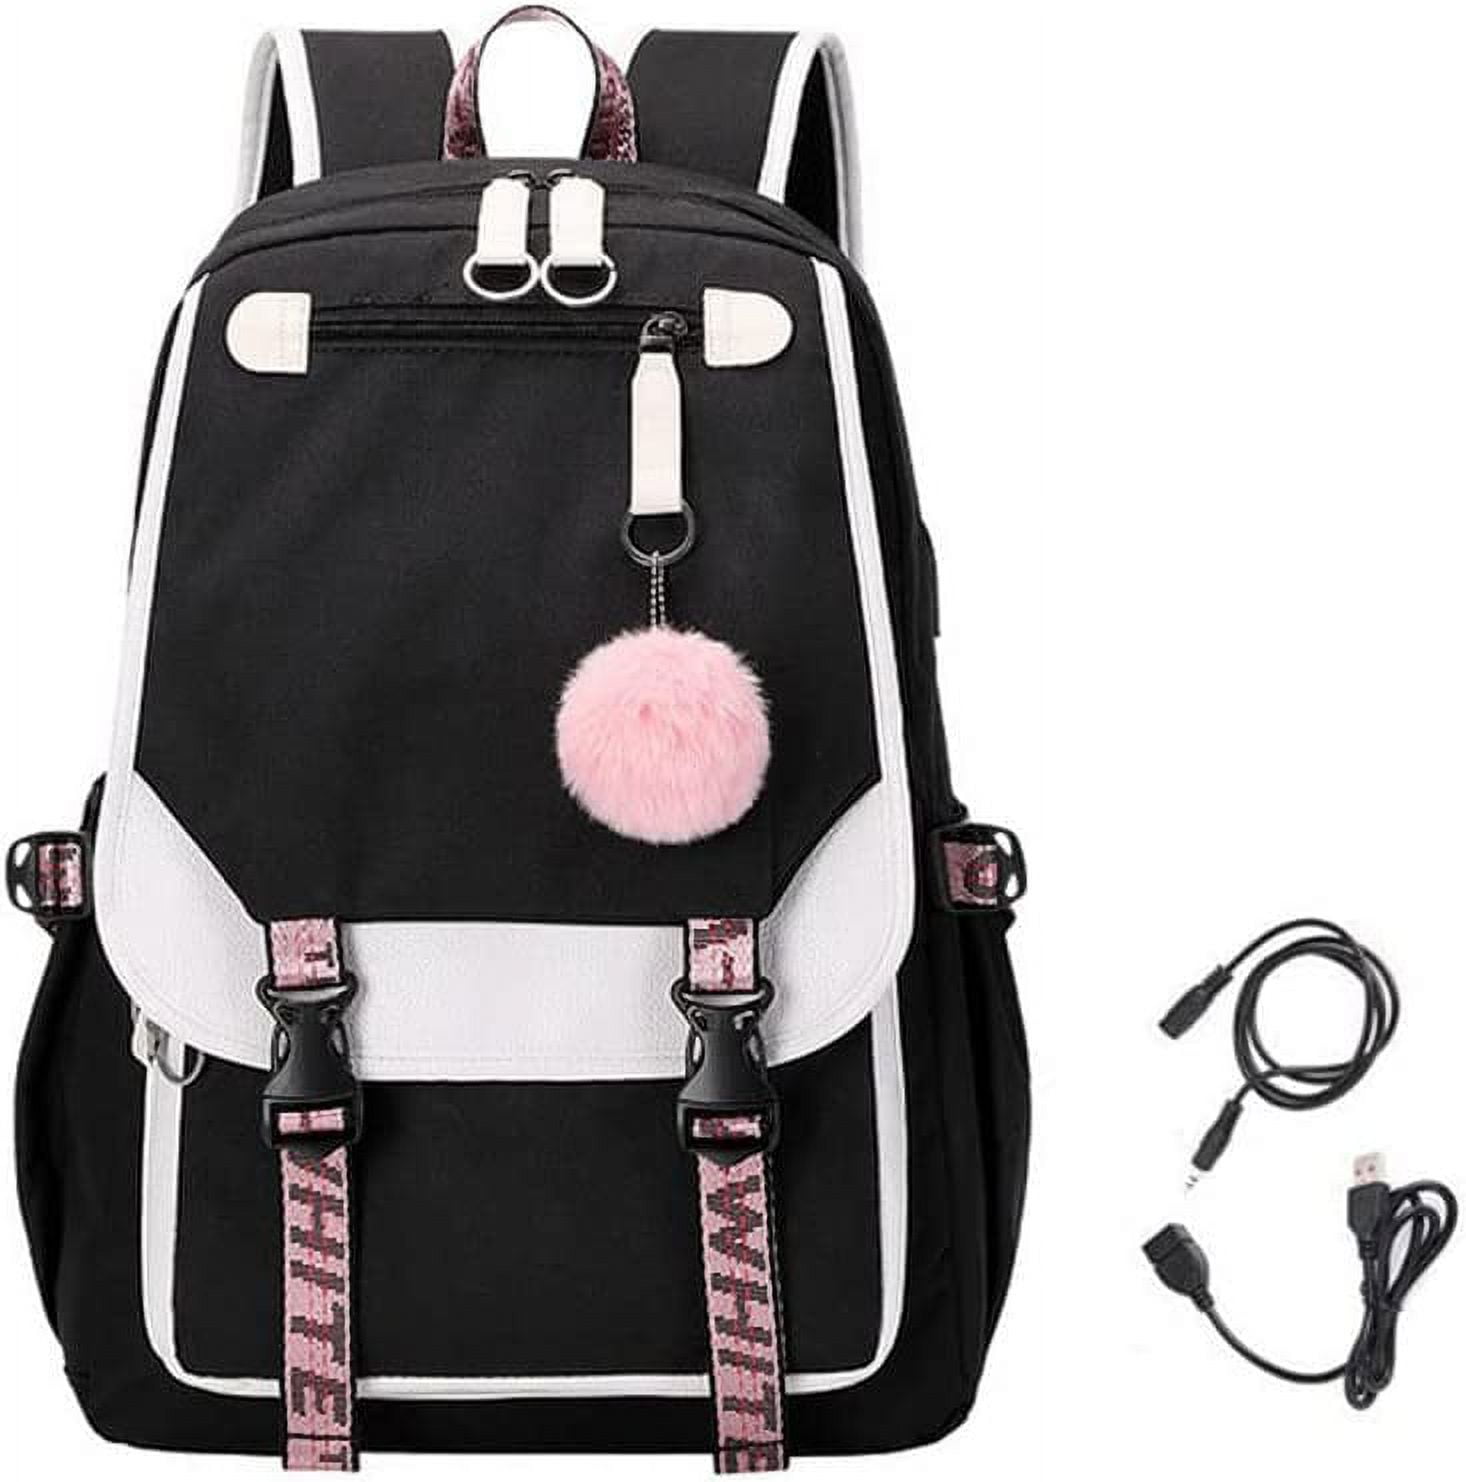 Hascupxs Black Casual Pink Student Backpack Set Daypack Lightweight Girls Laptop Backpack with Insulated Lunch Box School Bookbags for Fans Gifts